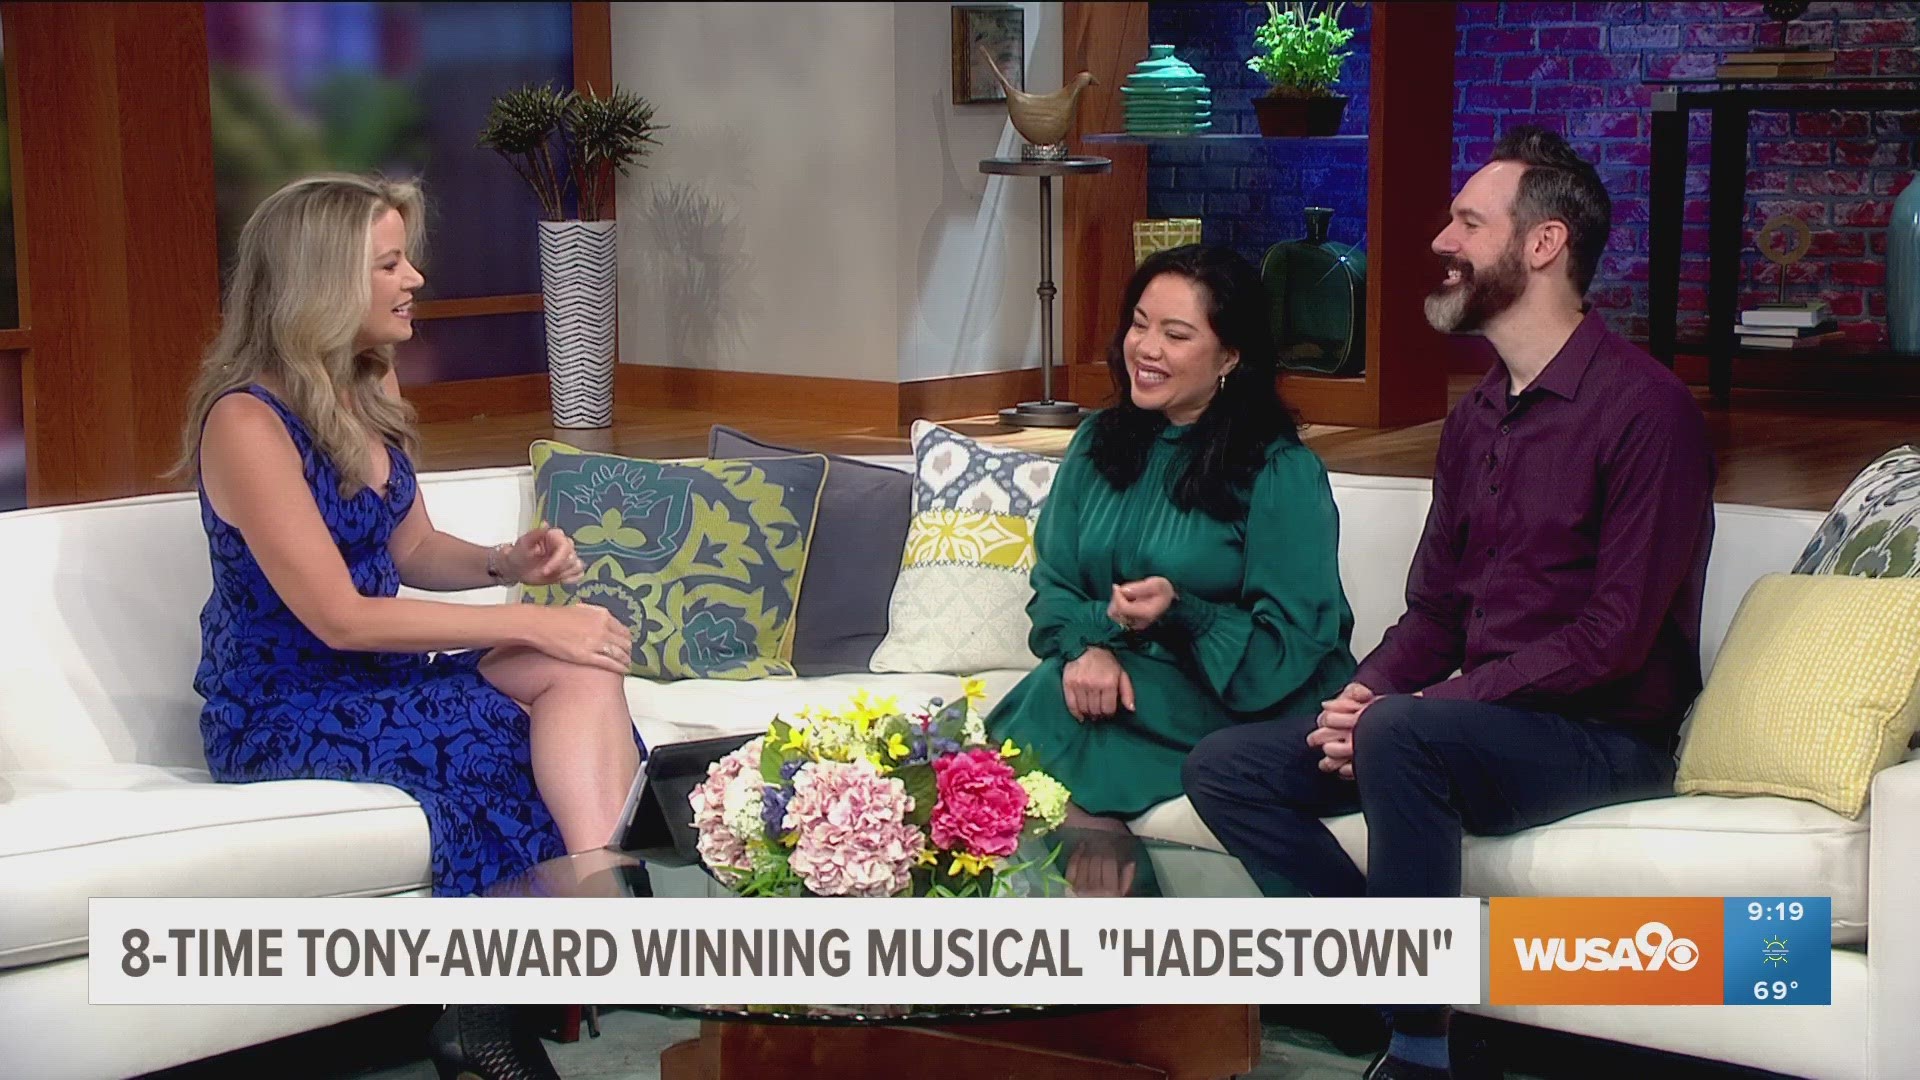 Tony Award winning musical 'Hadestown' is now playing at National Theatre through June 18th, 2023.